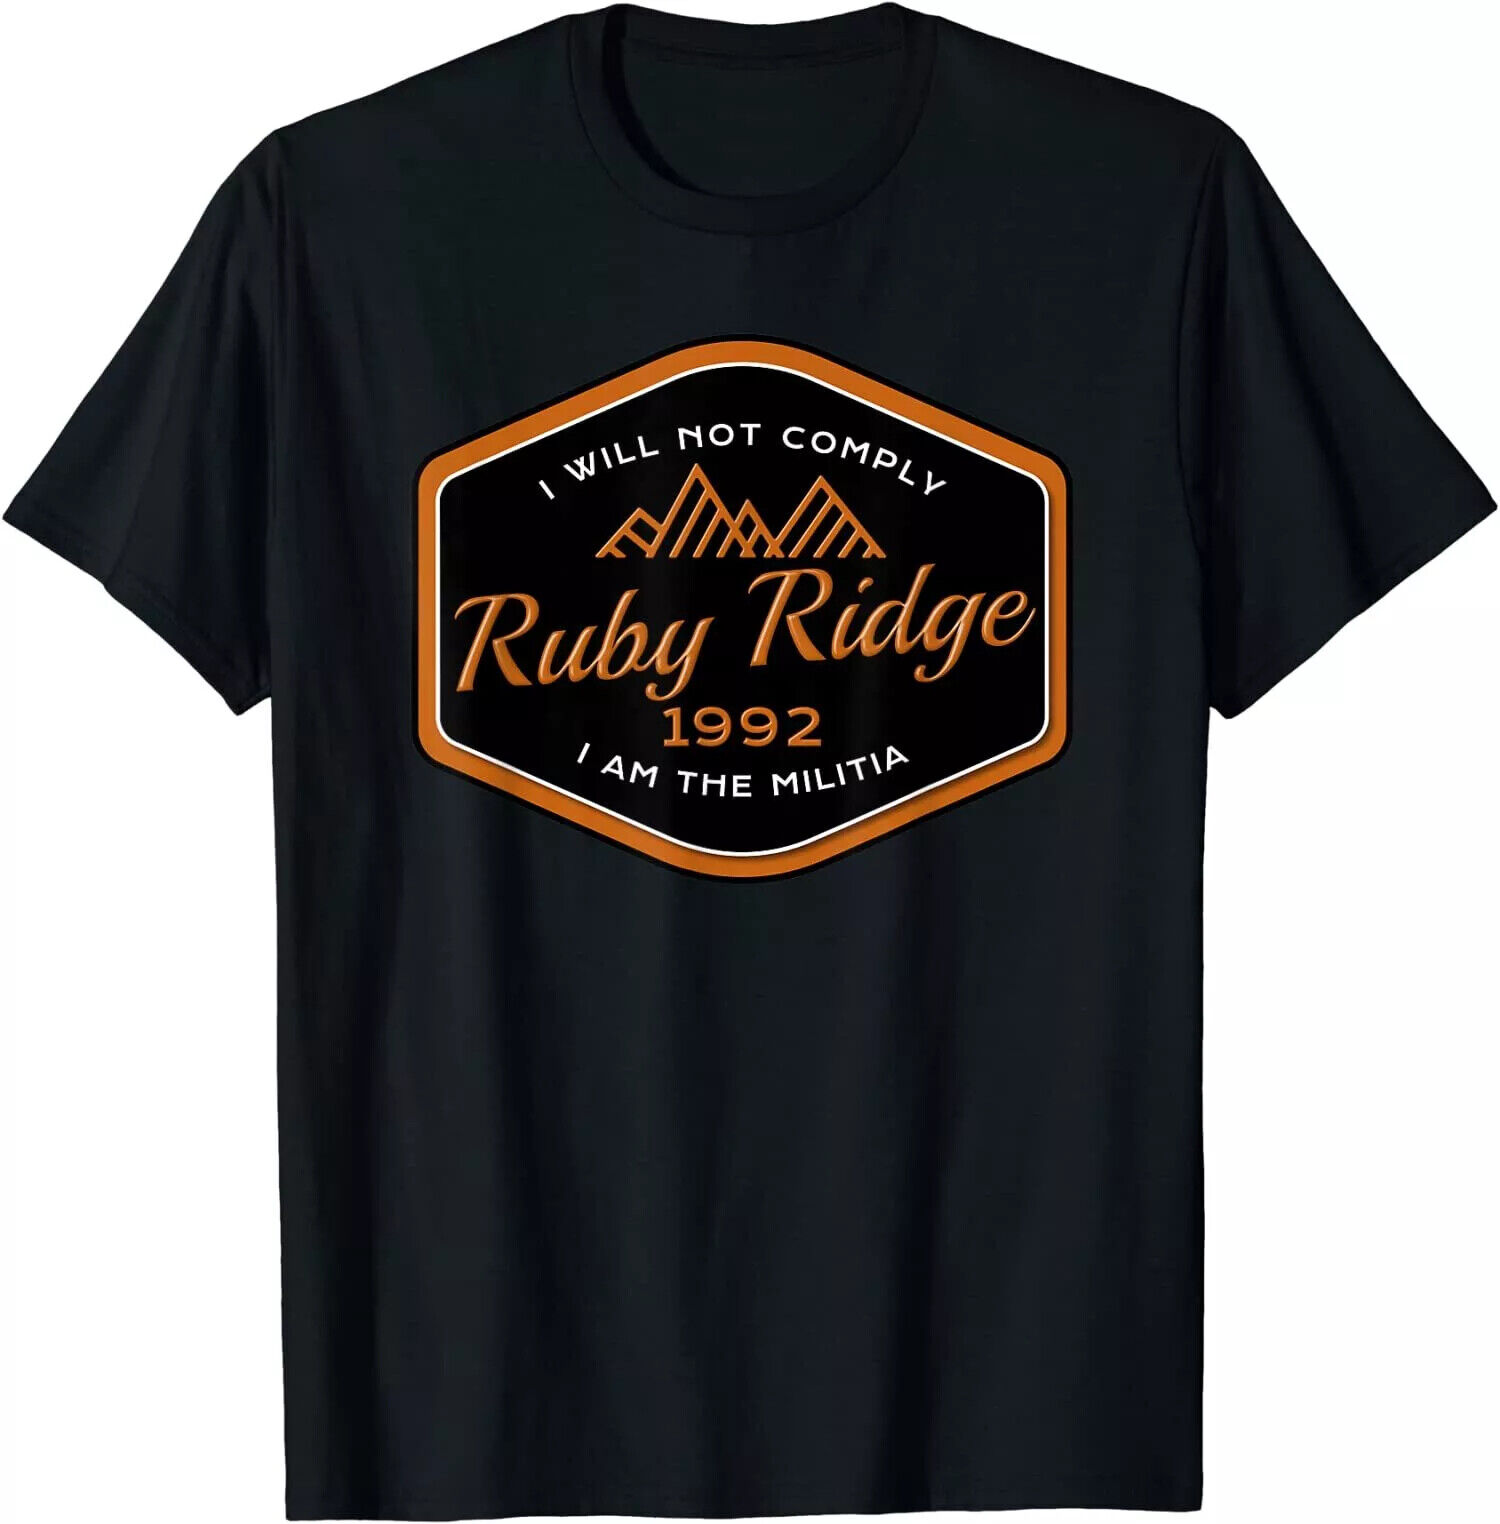 HOT Remember Ruby Ridge 1992. I Will Not Comply T-Shirt Size S-5XL, Best Gift